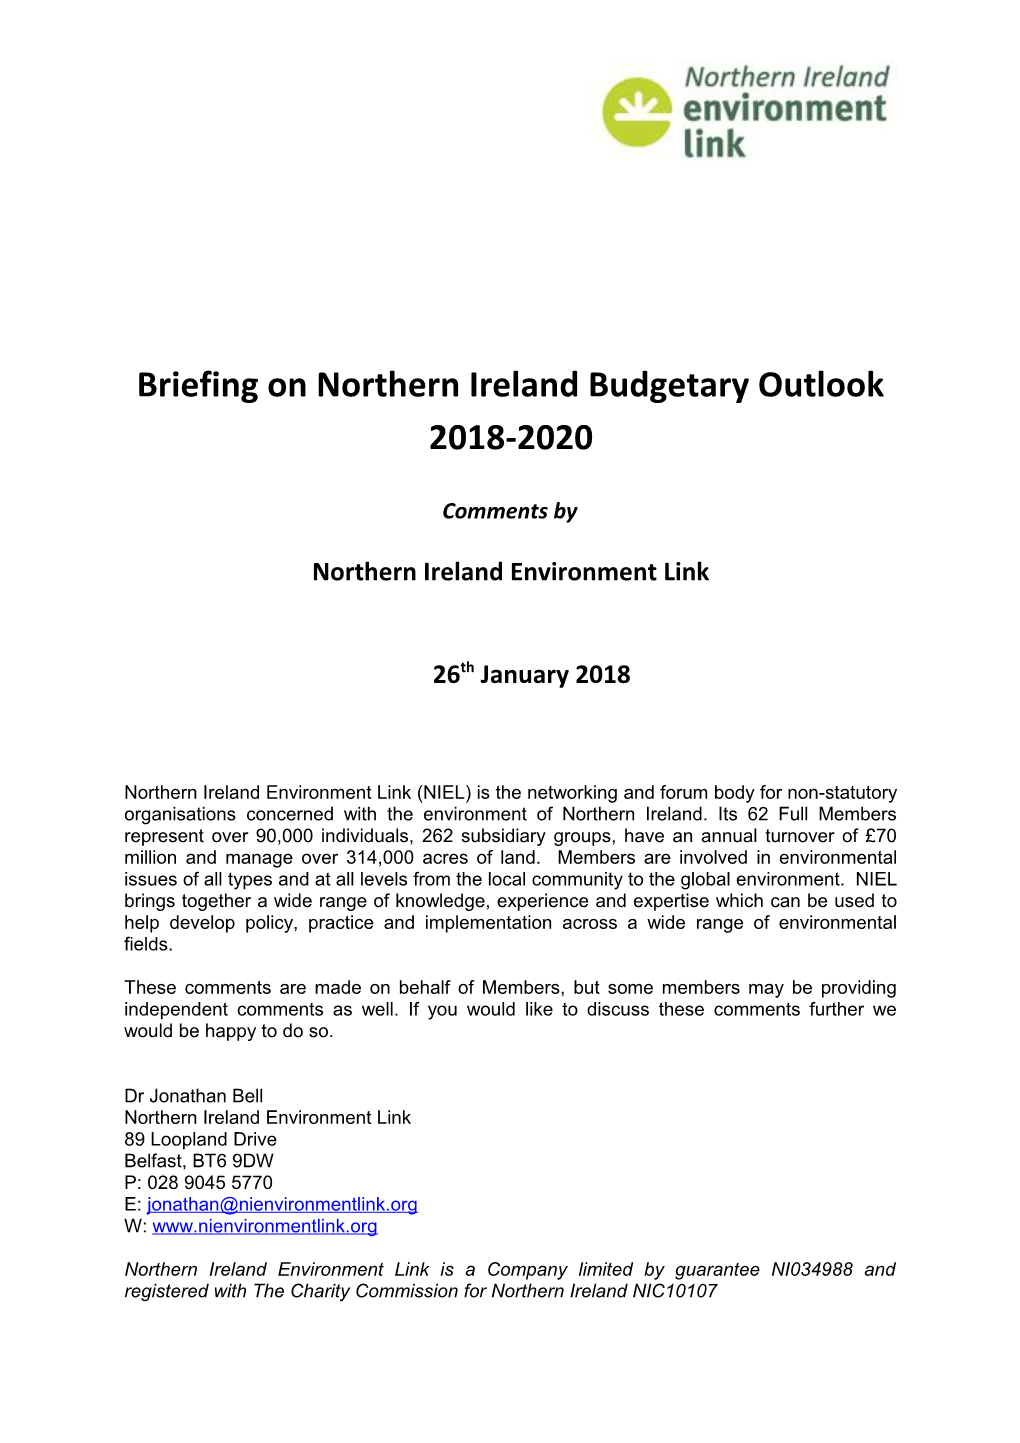 Briefing on Northern Ireland Budgetary Outlook 2018-2020